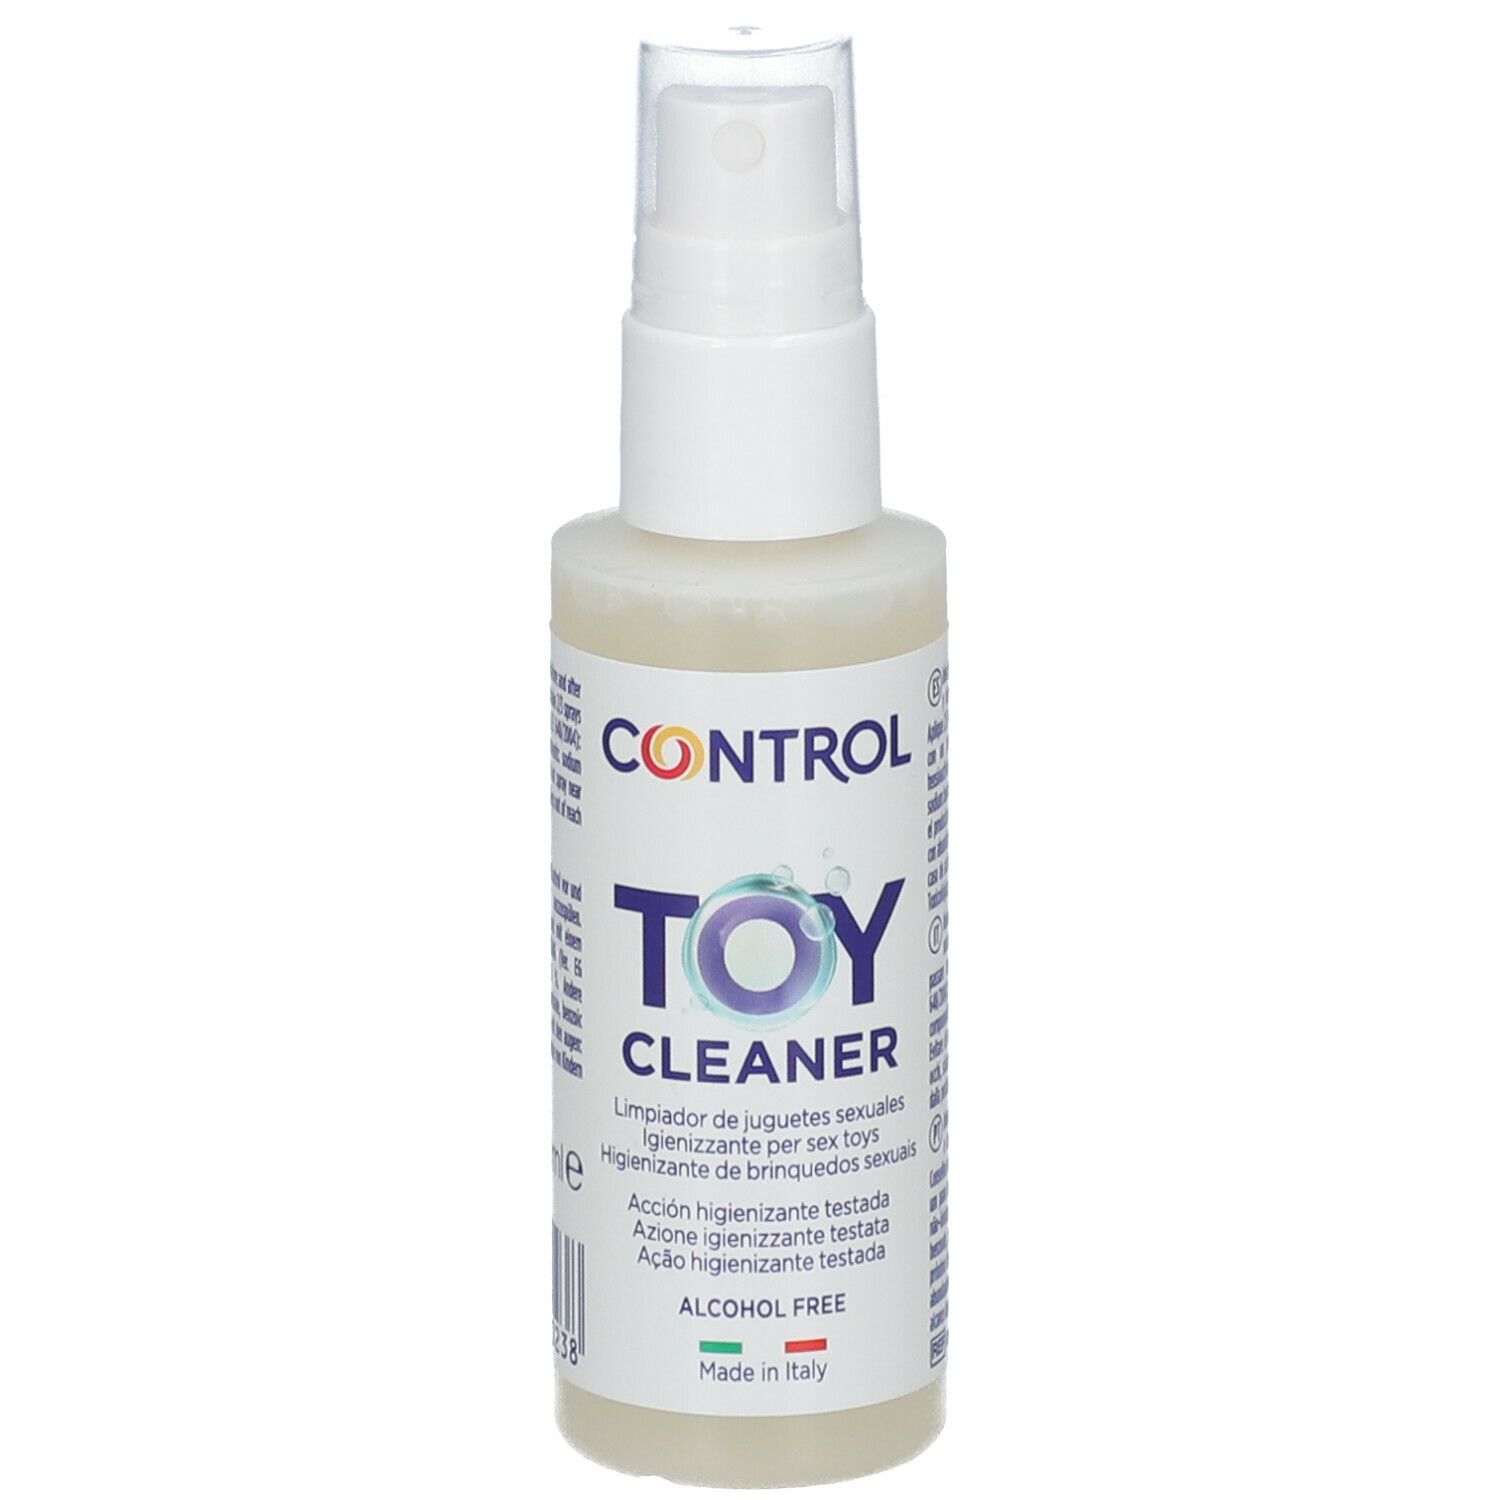 CONTROL Toy Cleaner